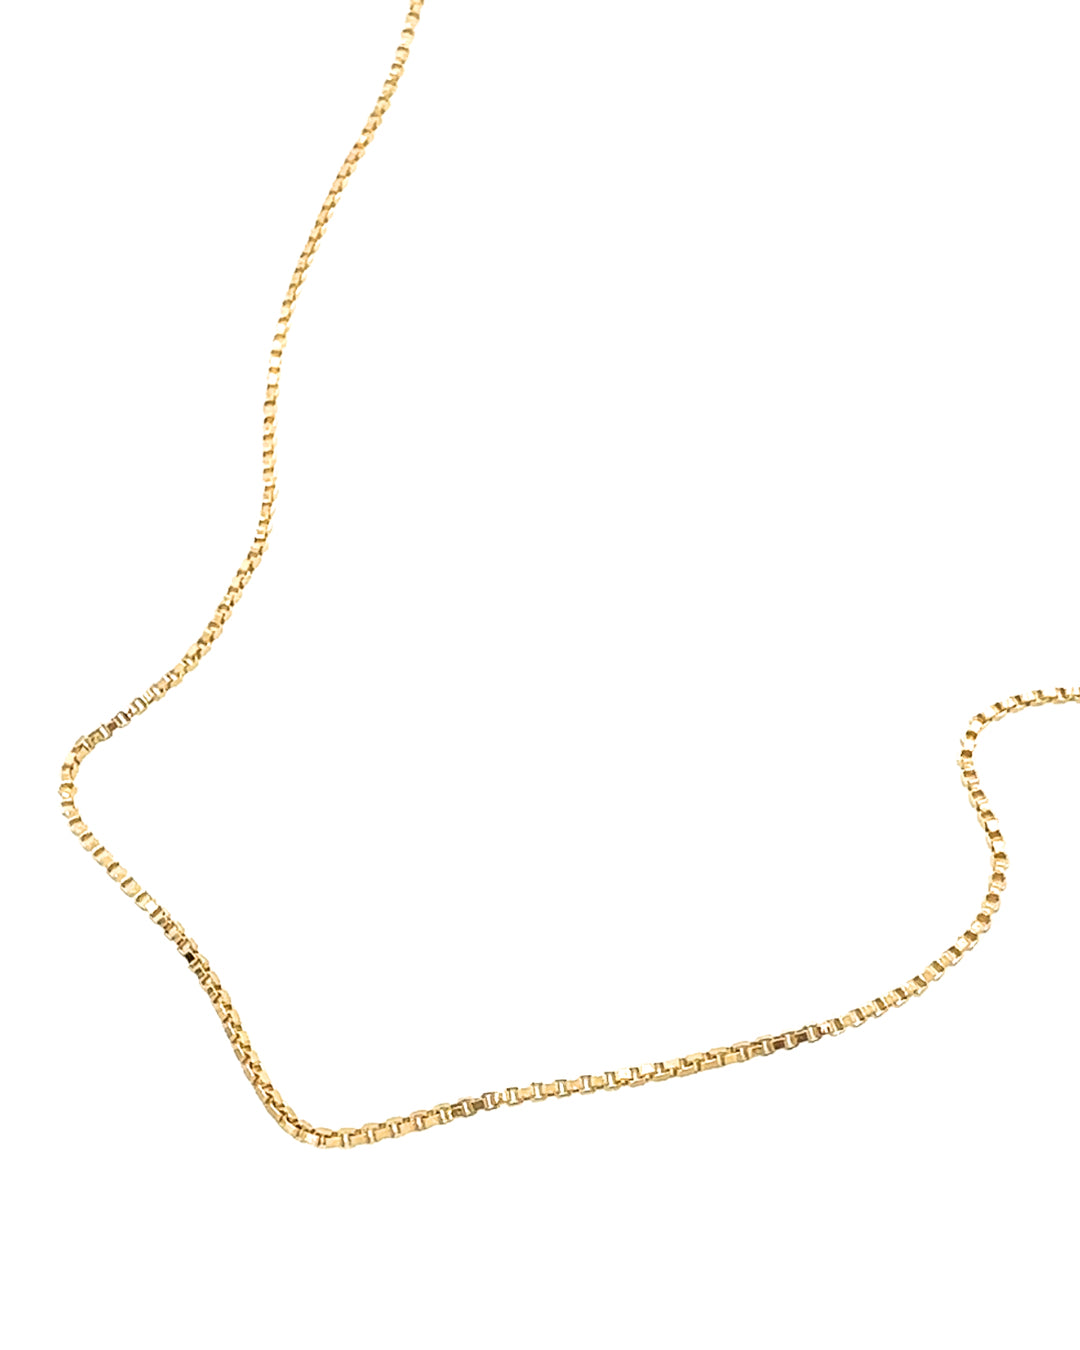 14k yellow gold fill box chain necklace